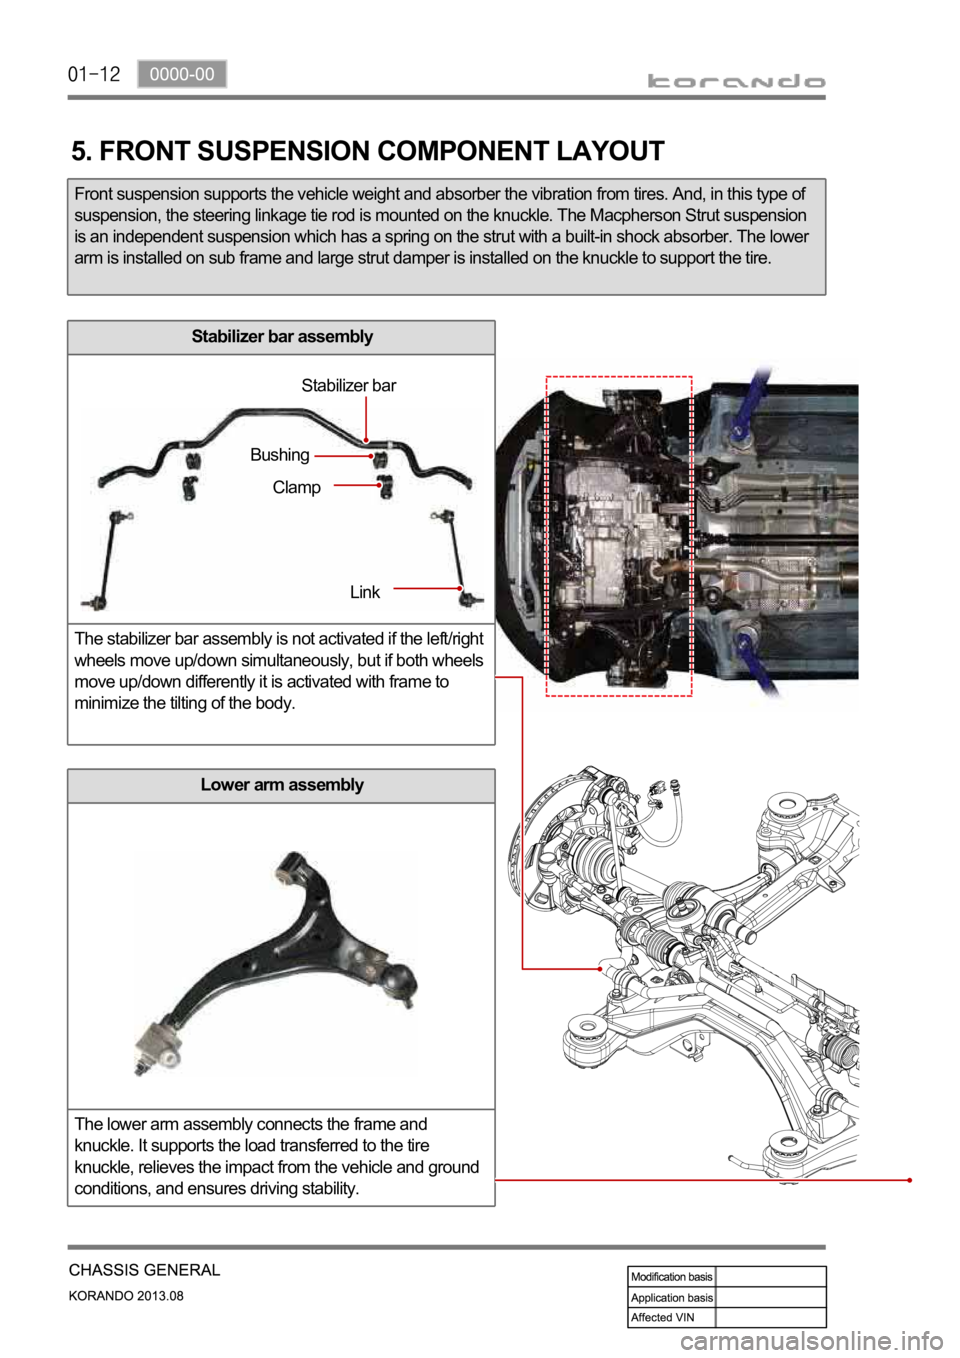 SSANGYONG KORANDO 2013 Owners Guide Stabilizer bar assembly
The stabilizer bar assembly is not activated if the left/right 
wheels move up/down simultaneously, but if both wheels 
move up/down differently it is activated with frame to 
